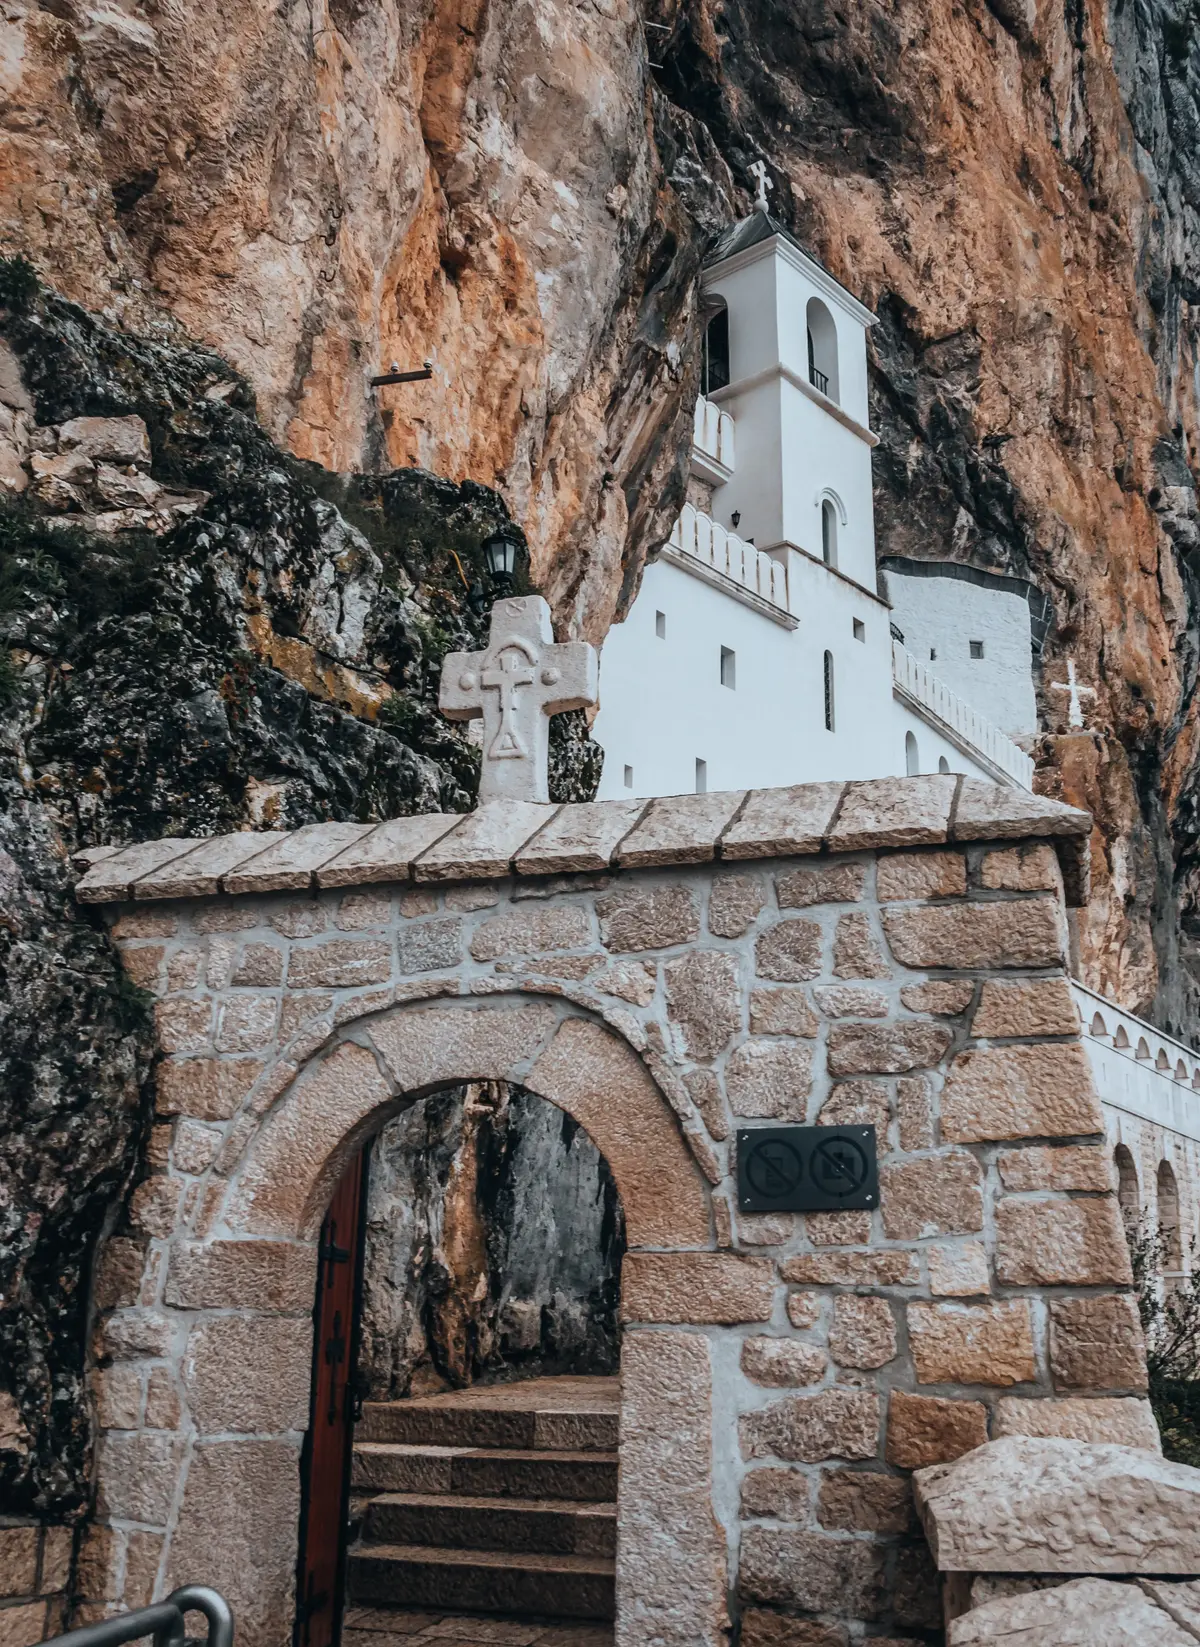 Ostrog monastery built into the cliffs